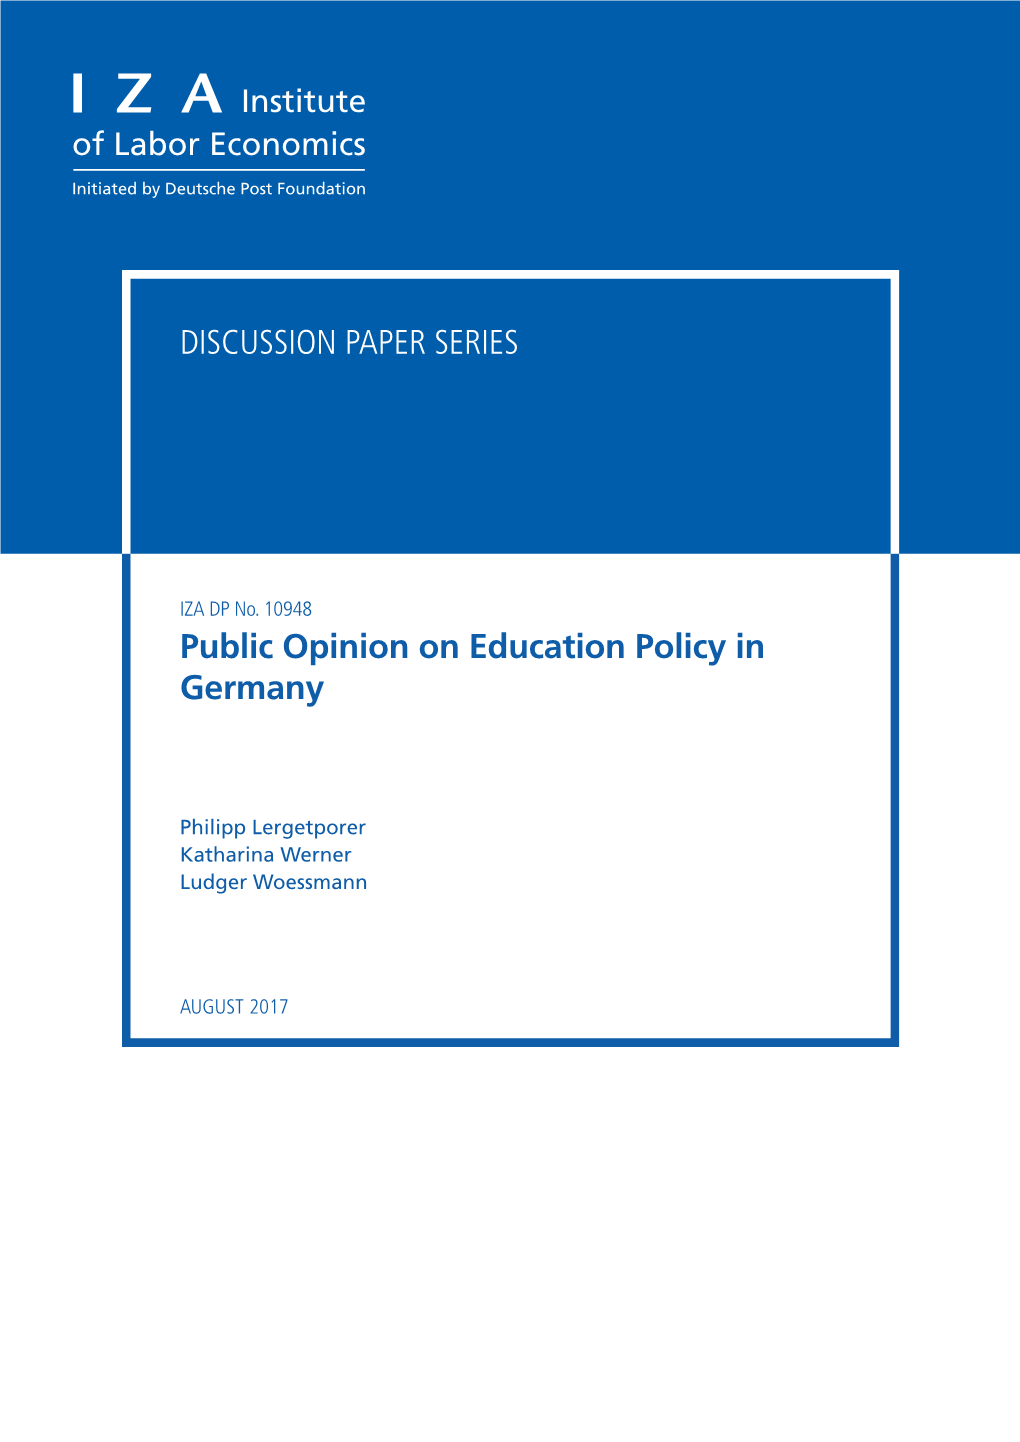 Public Opinion on Education Policy in Germany